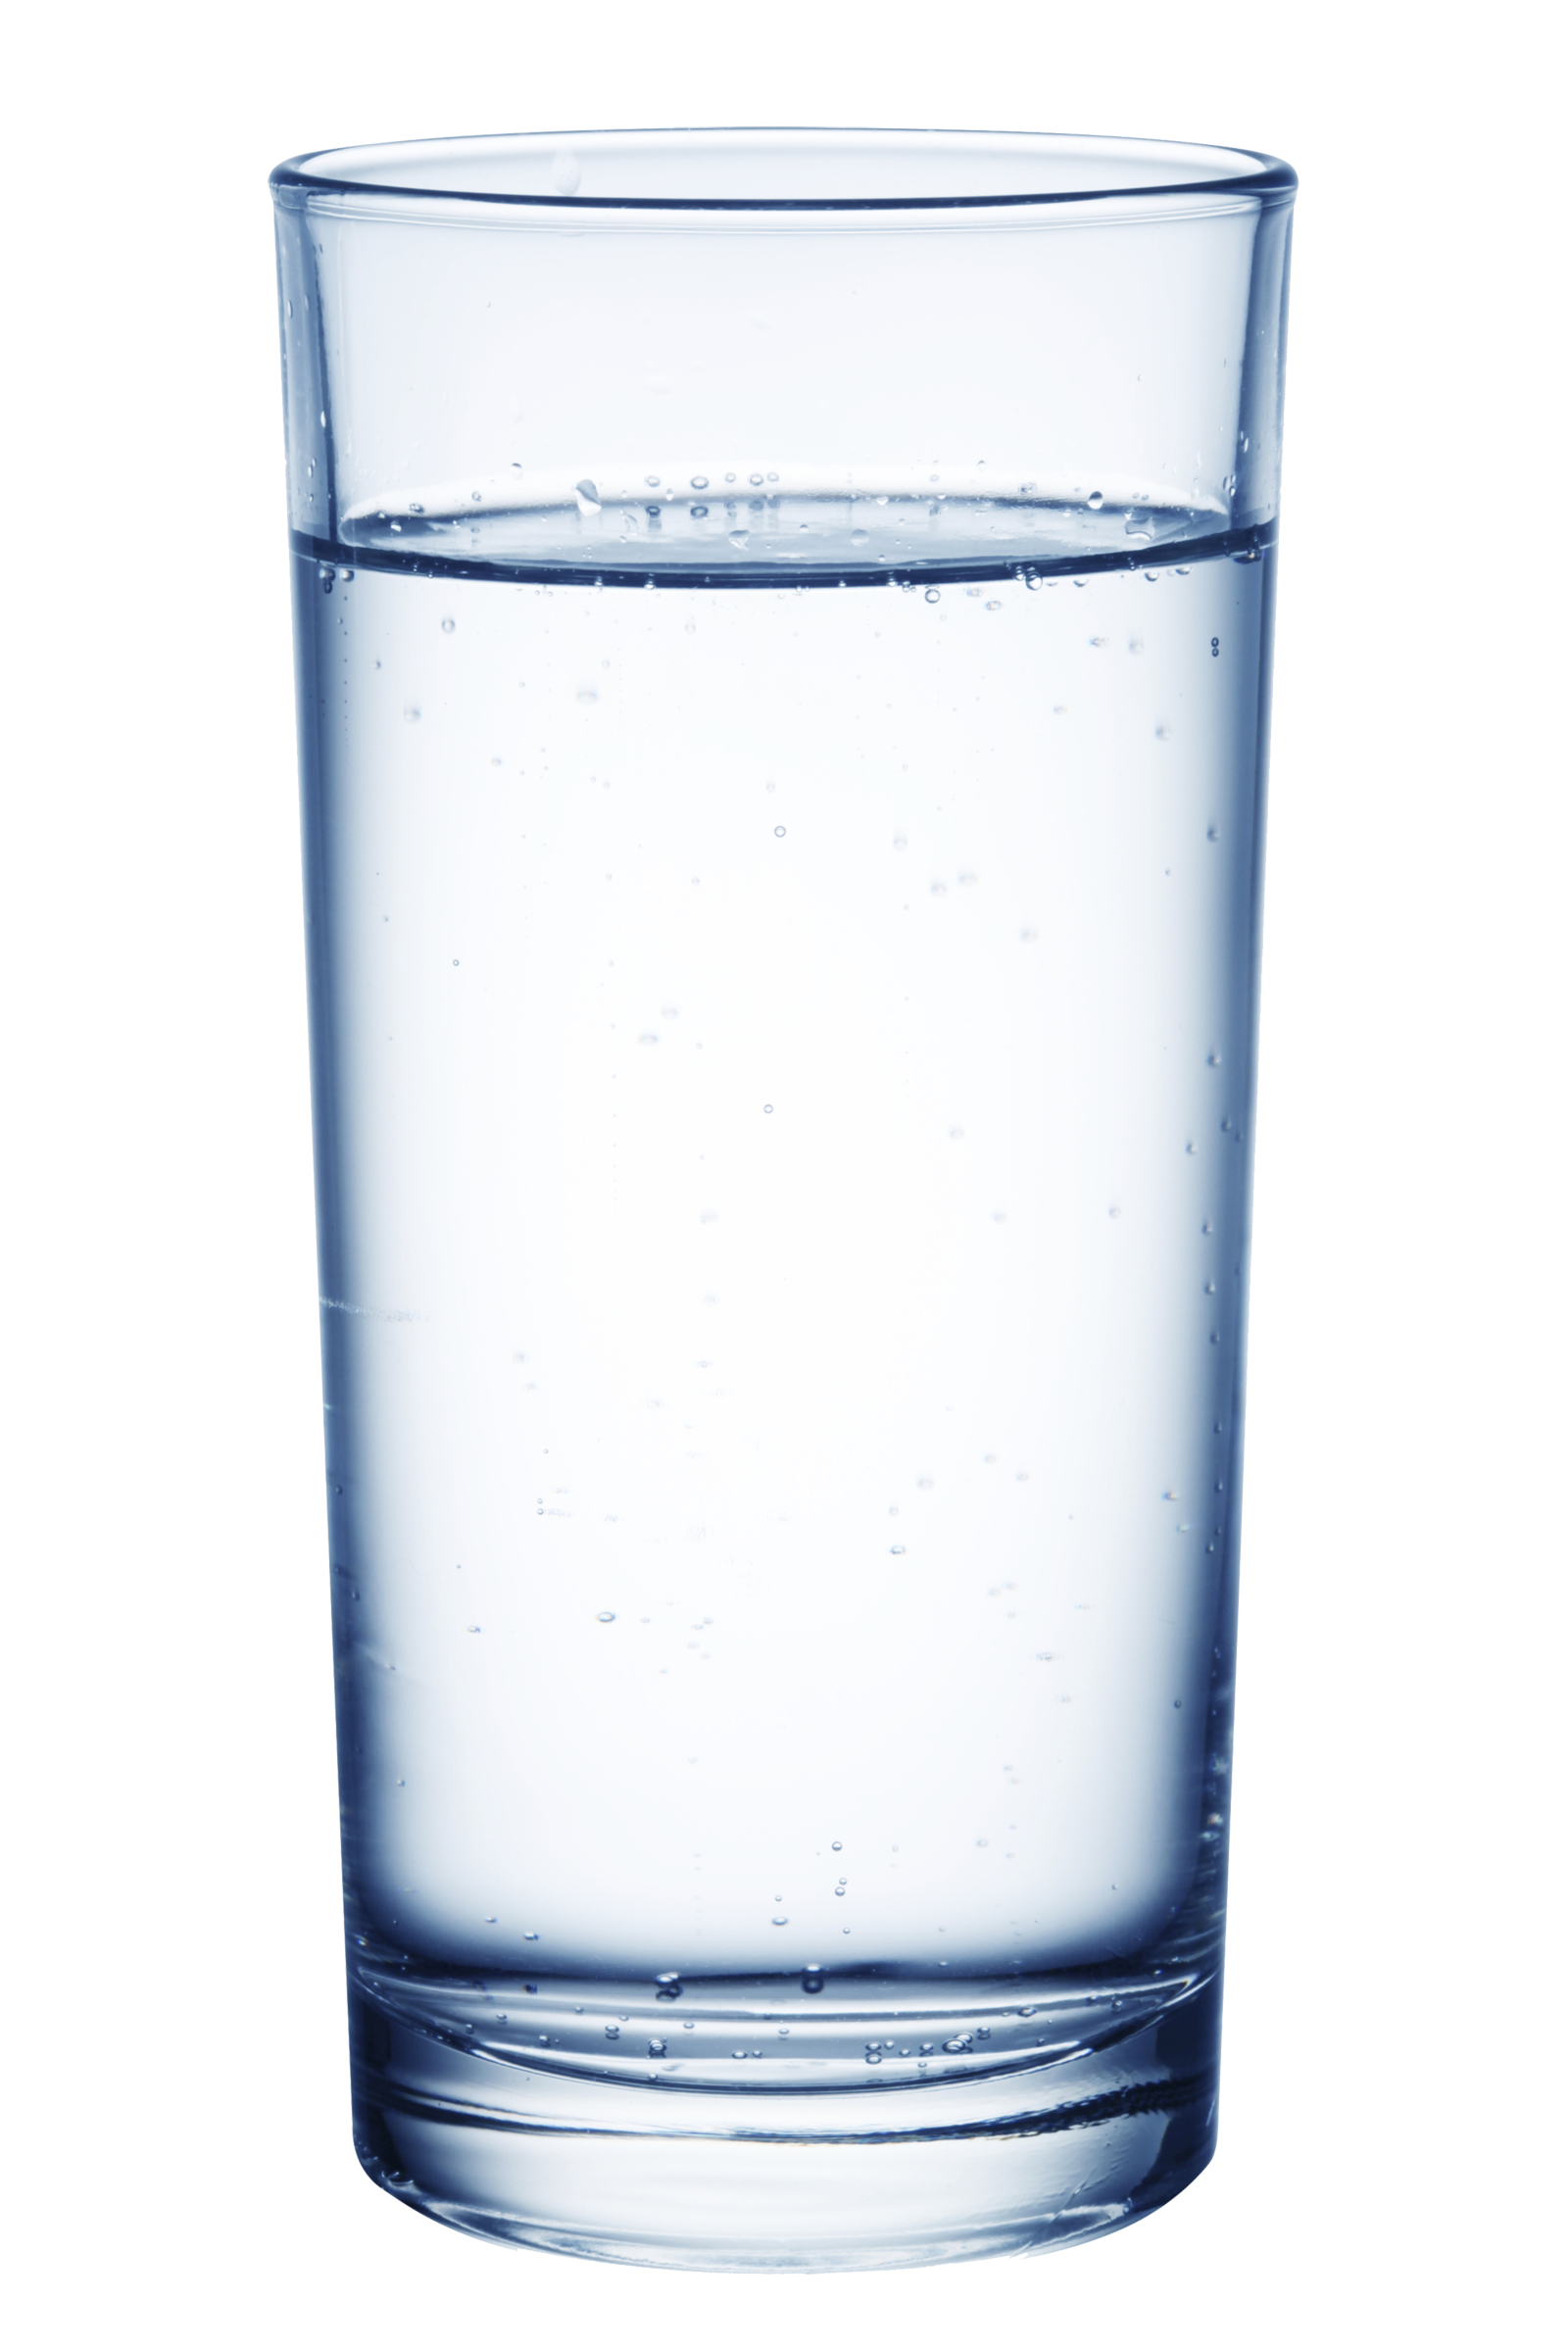 Water Glass Image PNG Image